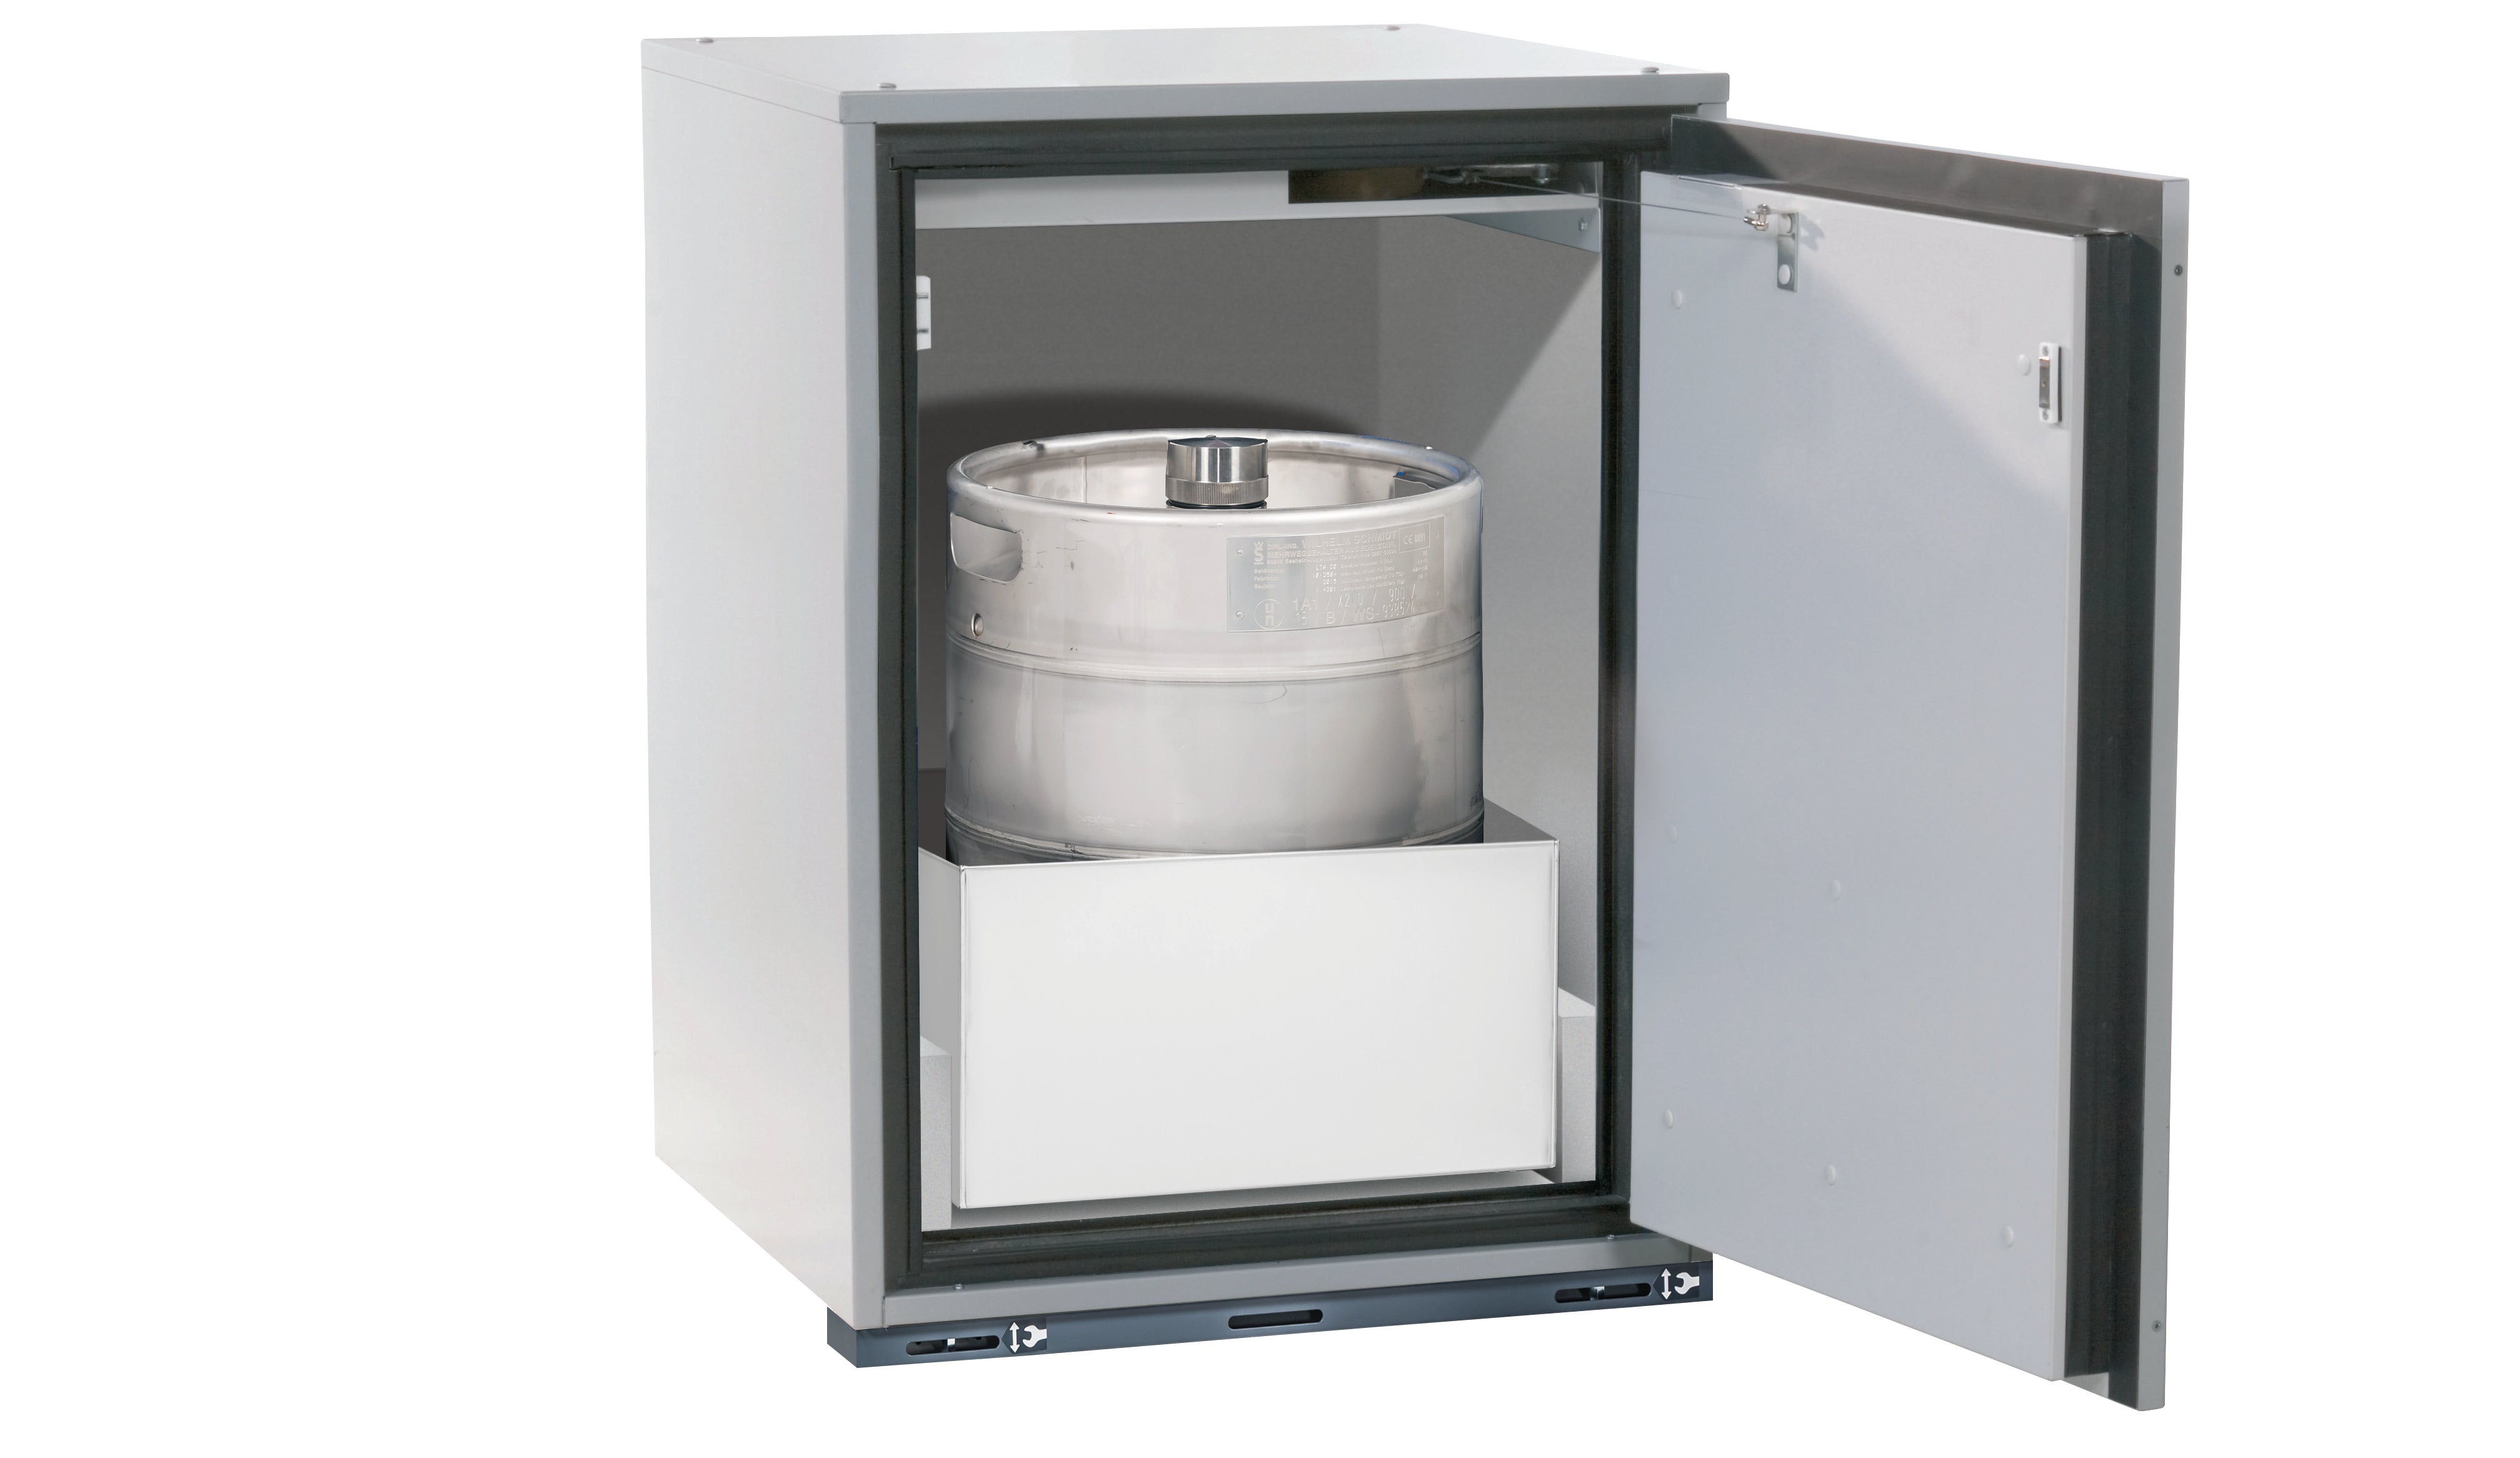 Type 90 safety base cabinet UB-T-90 model UB90.080.059.060.TR in light gray RAL 7035 with 1x pull-out tray STAWA-R max. interior height (sheet steel)